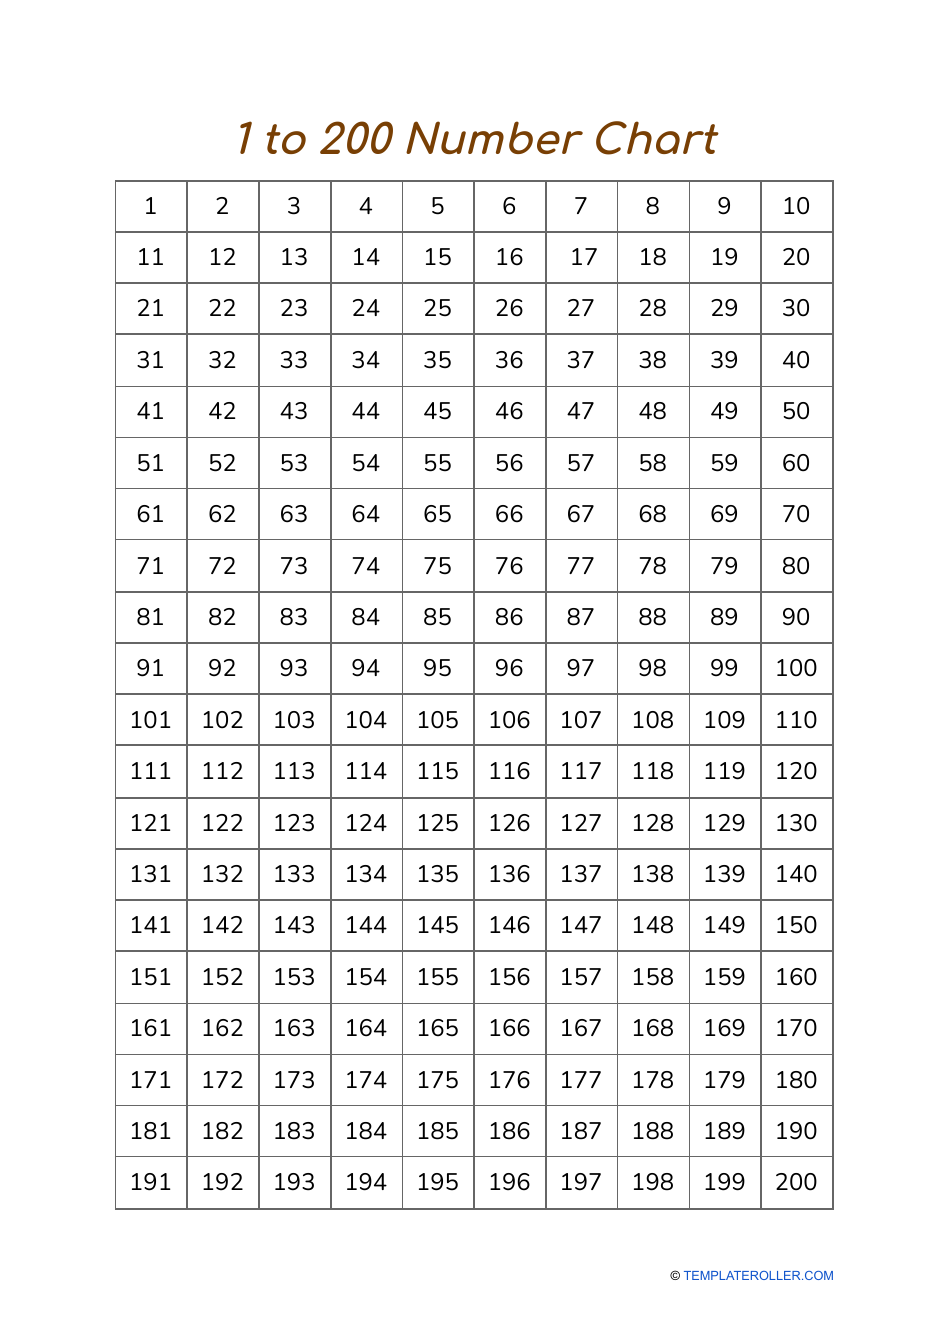 1 to 200 Number Chart Download Printable PDF Templateroller